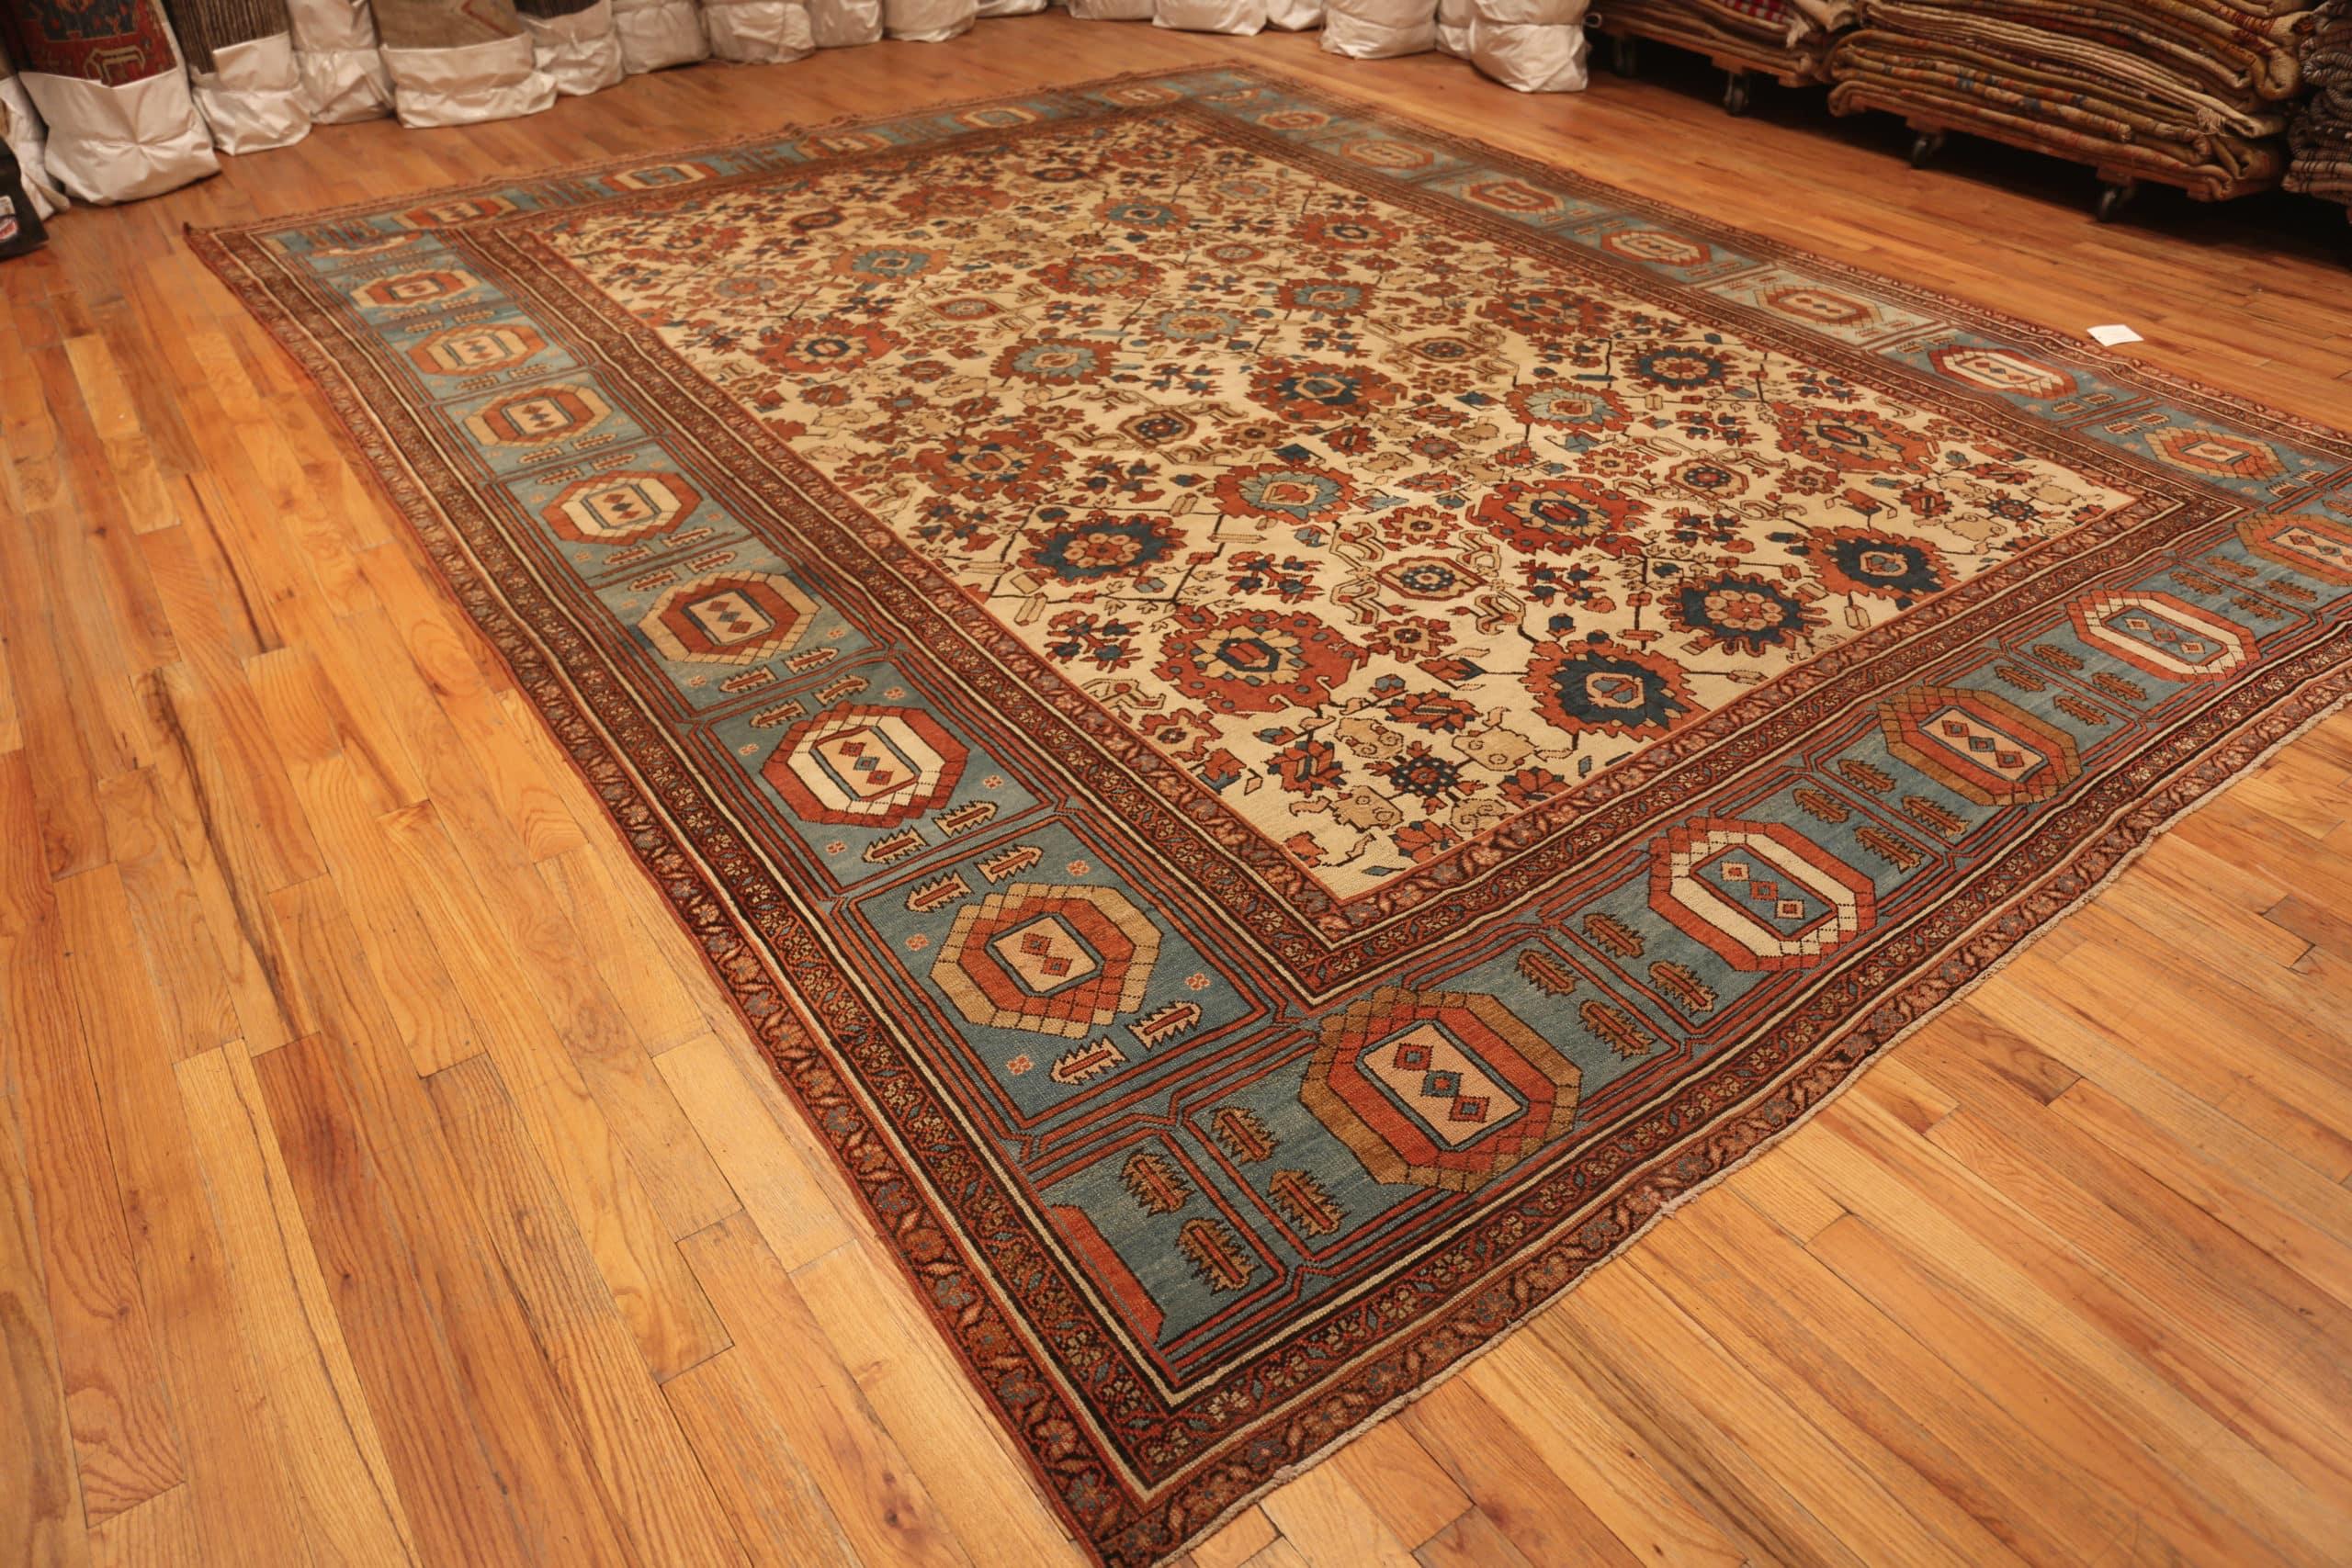 Large Antique Persian Bakshaish Rug, Country of Origin / rug type: Persian rug, Circa date: 1860. Size: 12 ft x 15 ft 3 in (3.66 m x 4.65 m)



